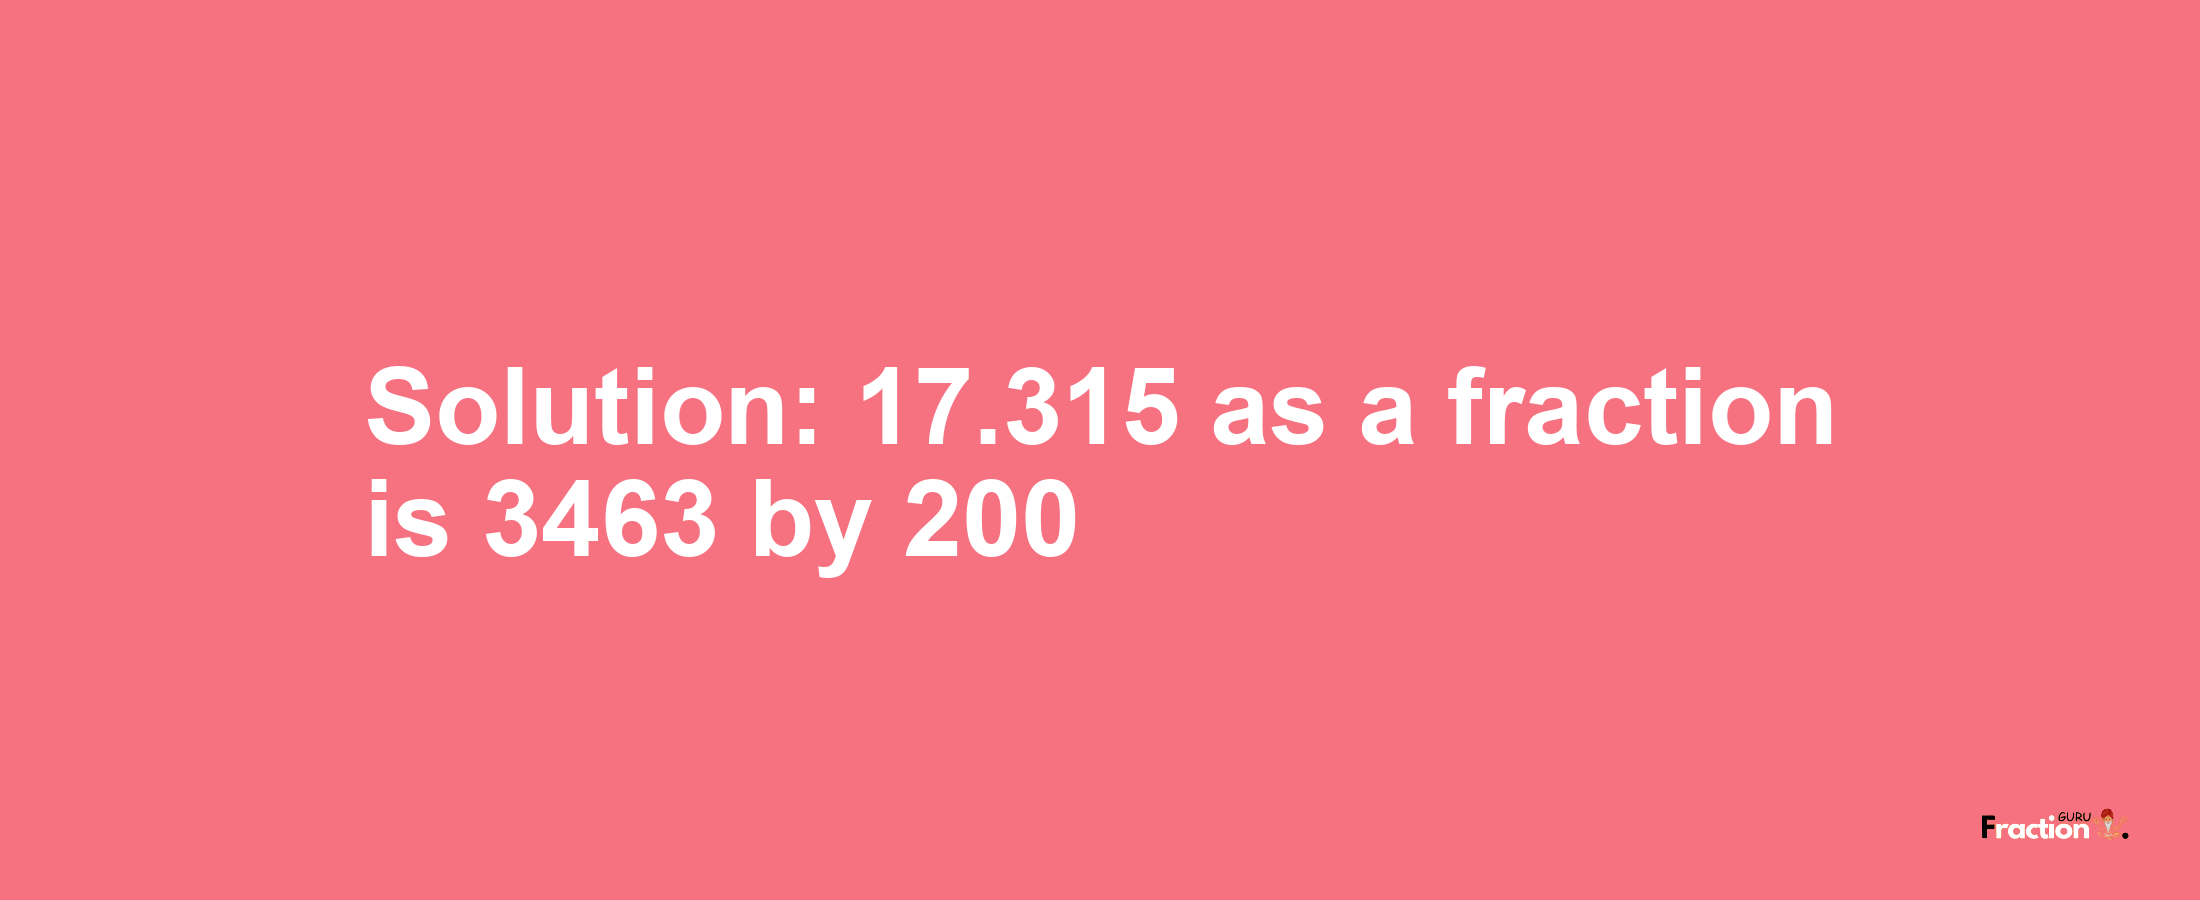 Solution:17.315 as a fraction is 3463/200